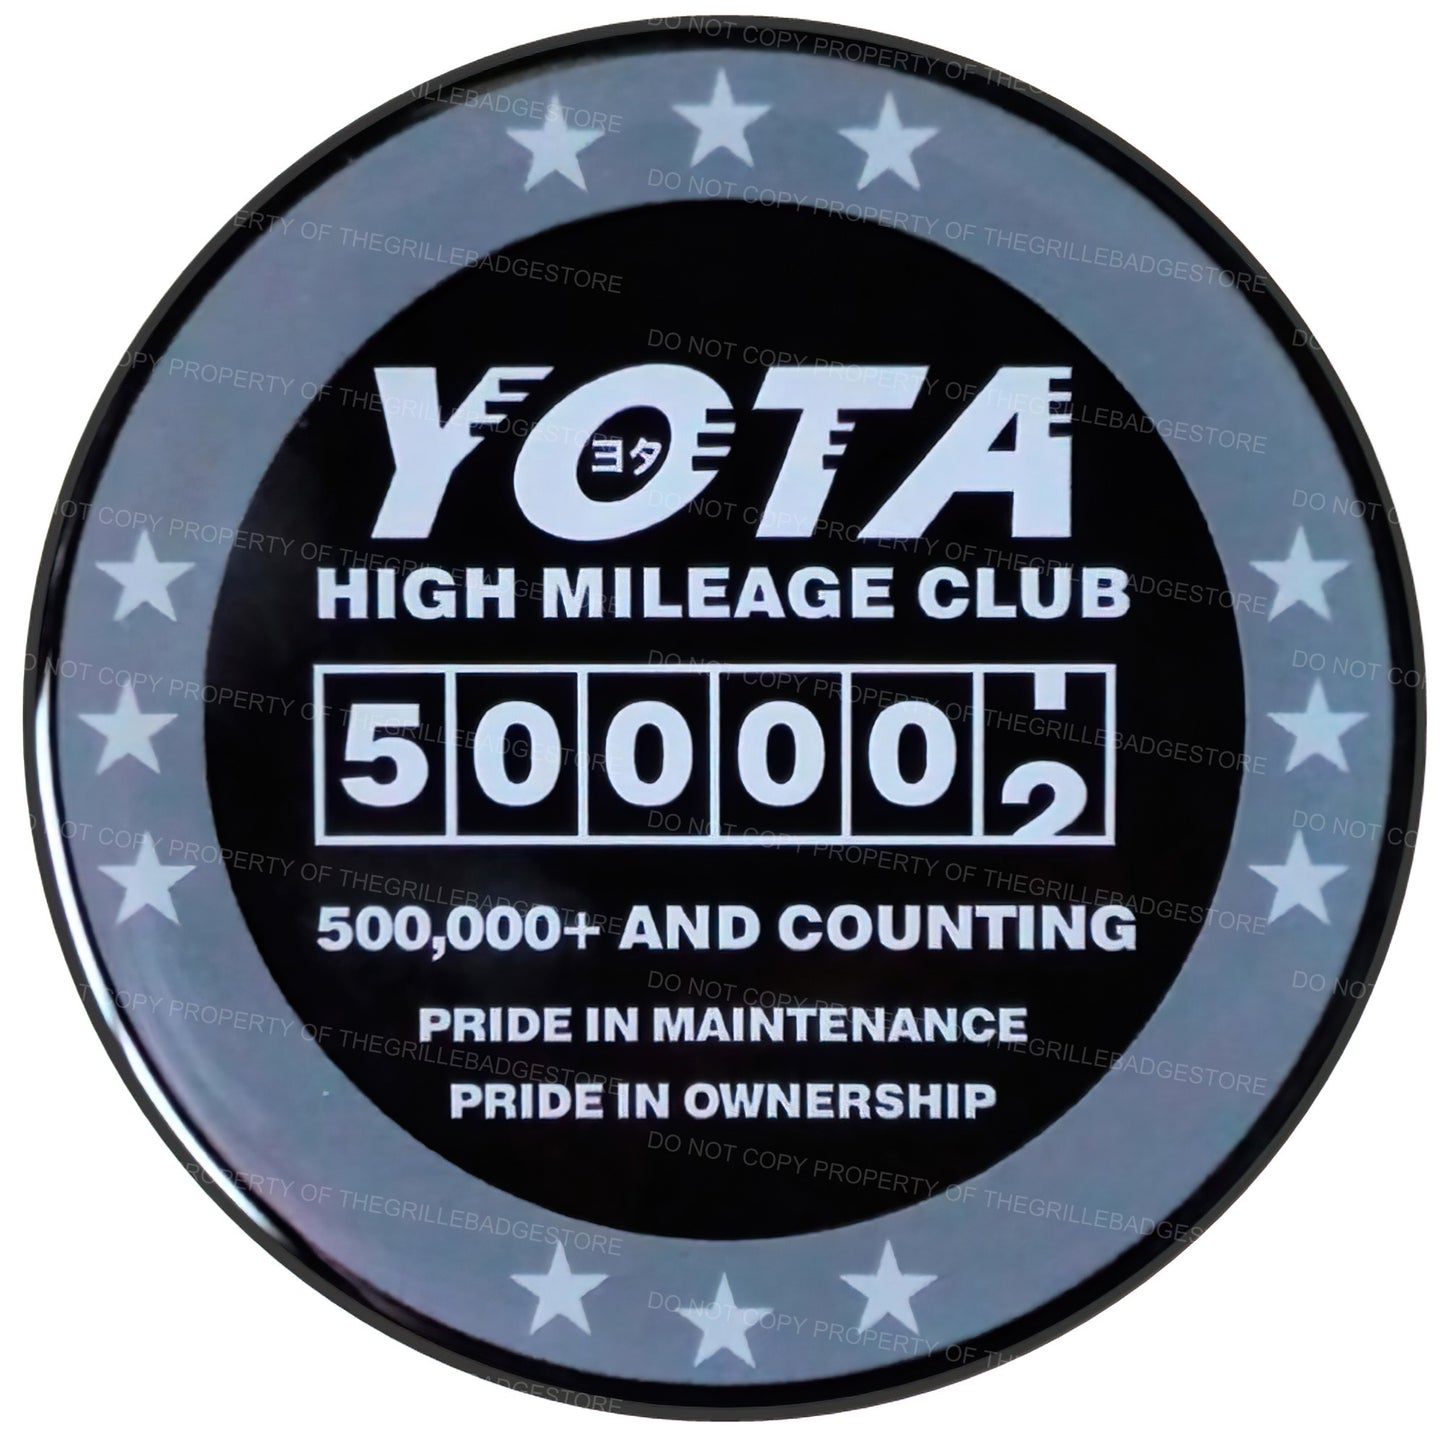 High Mileage Grille Badge For Toyota 500,000